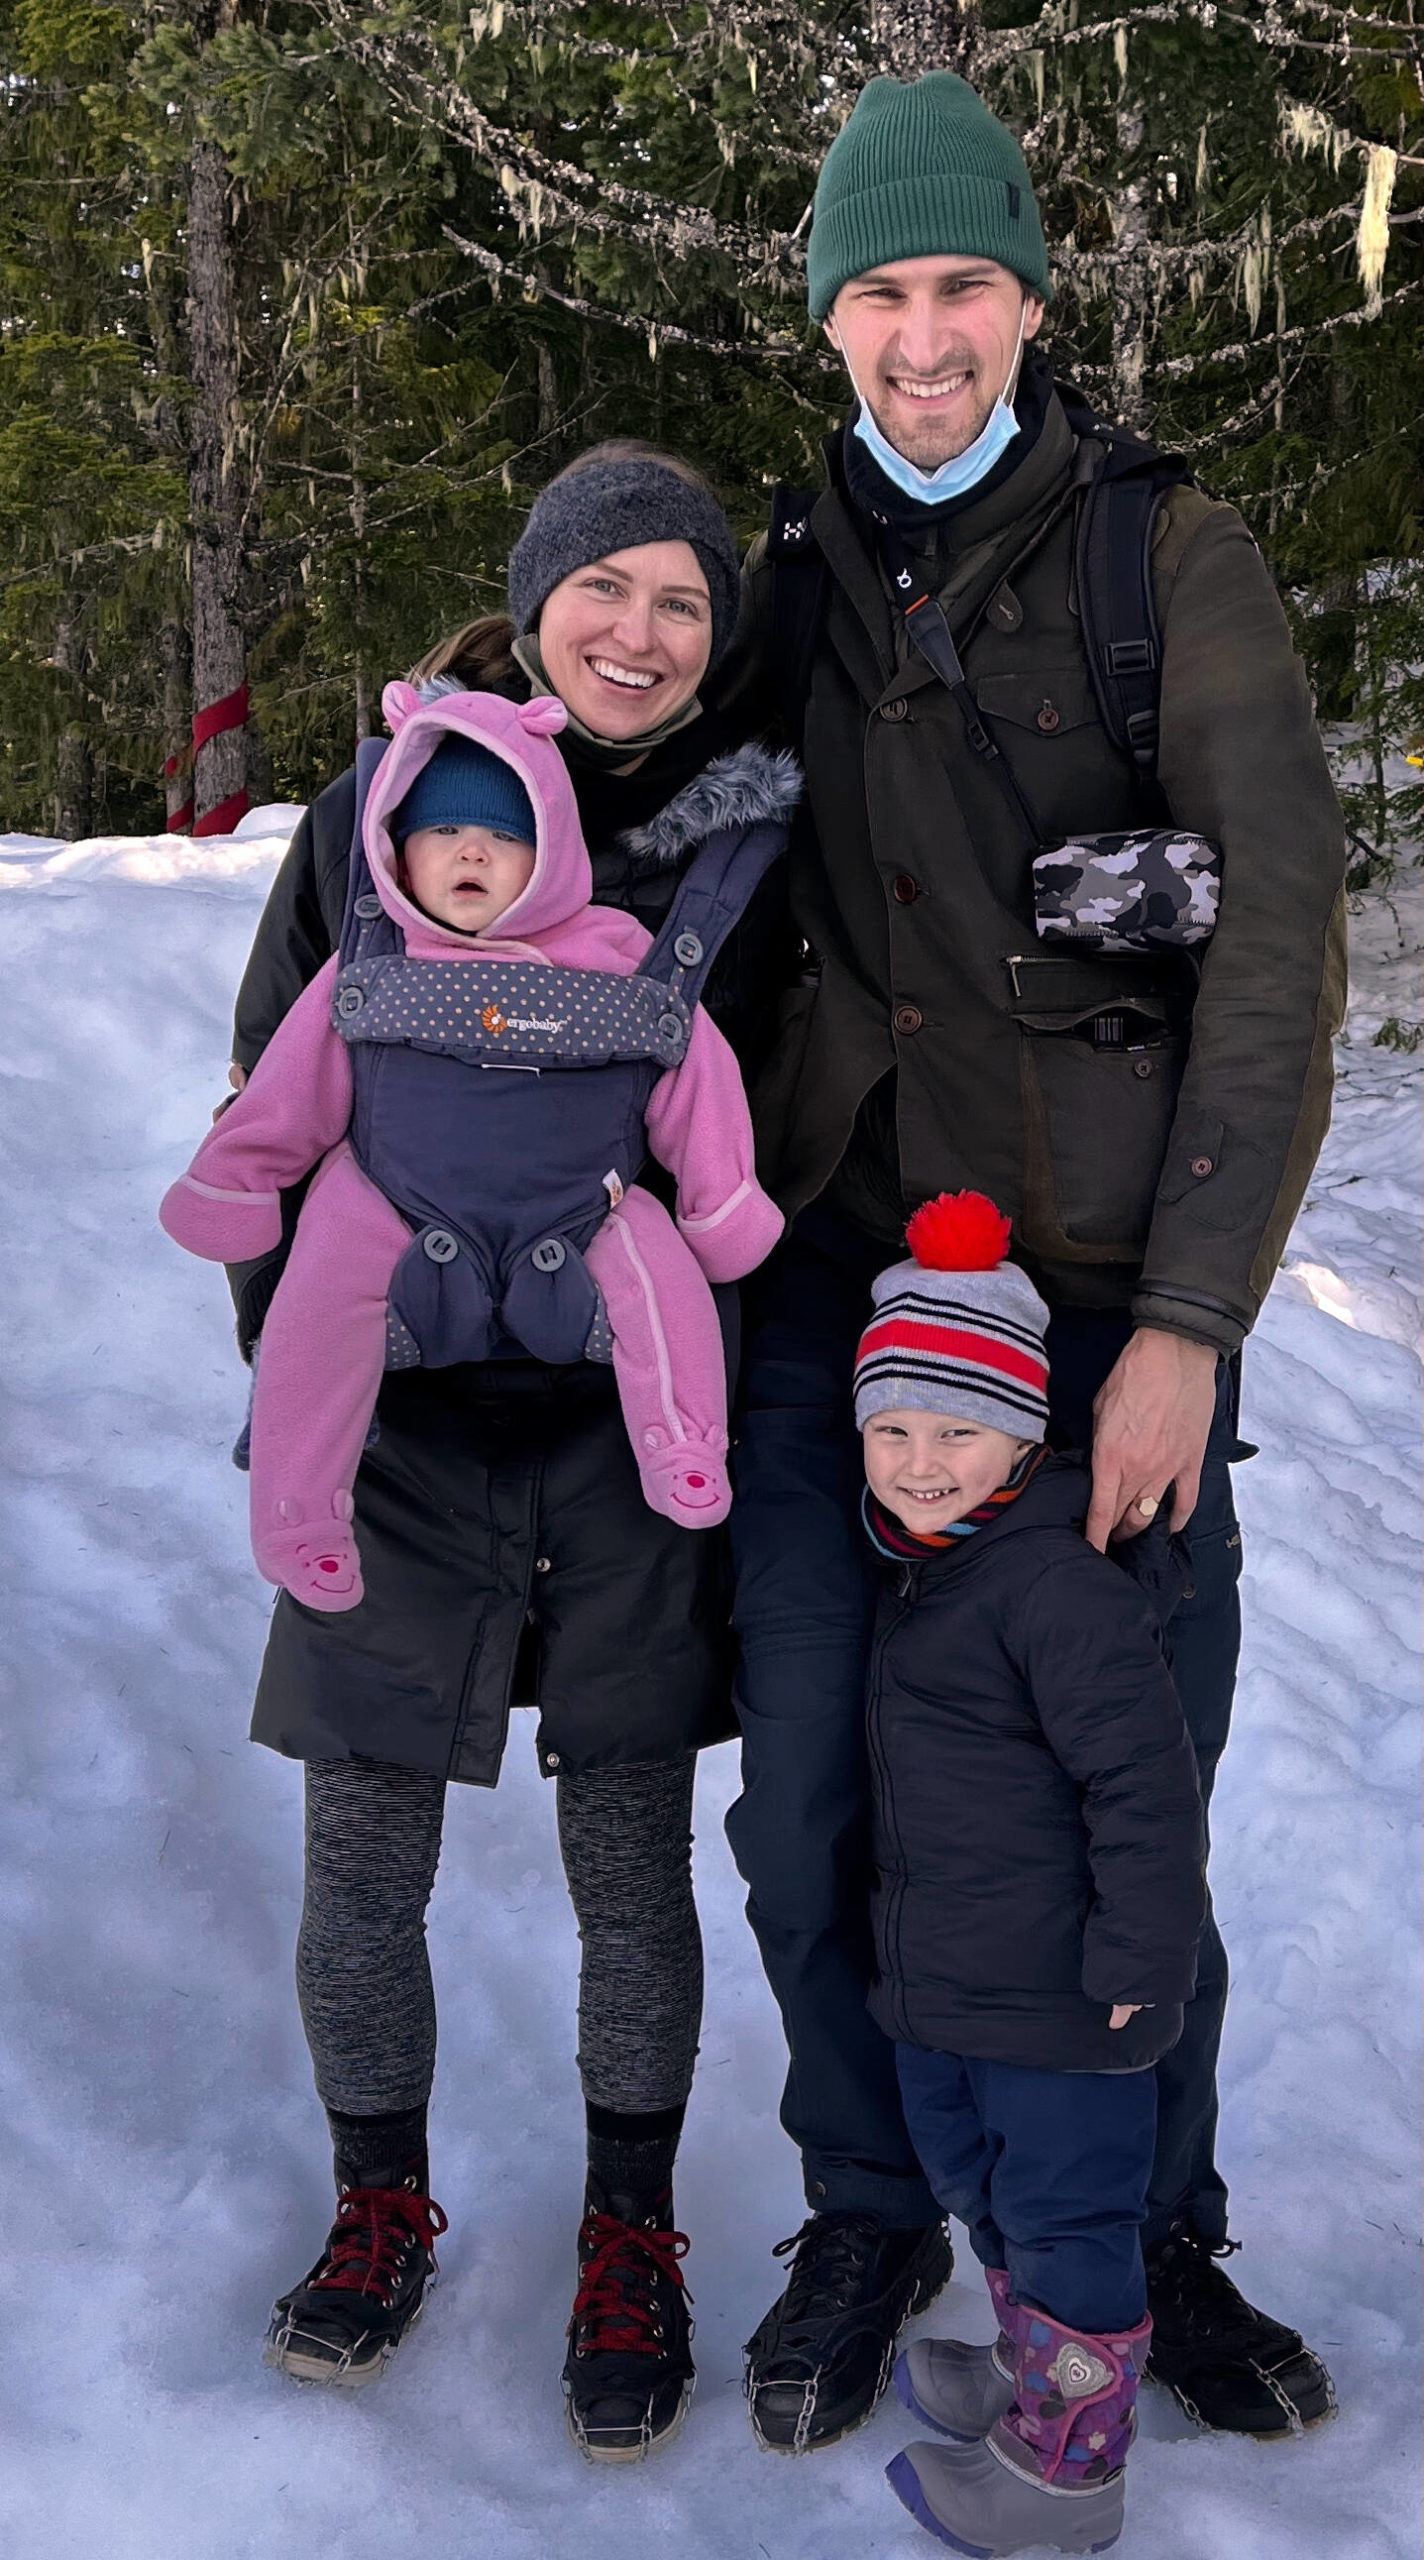 Christian Nielsen with wife Michelle and their children Ethan and Vera.